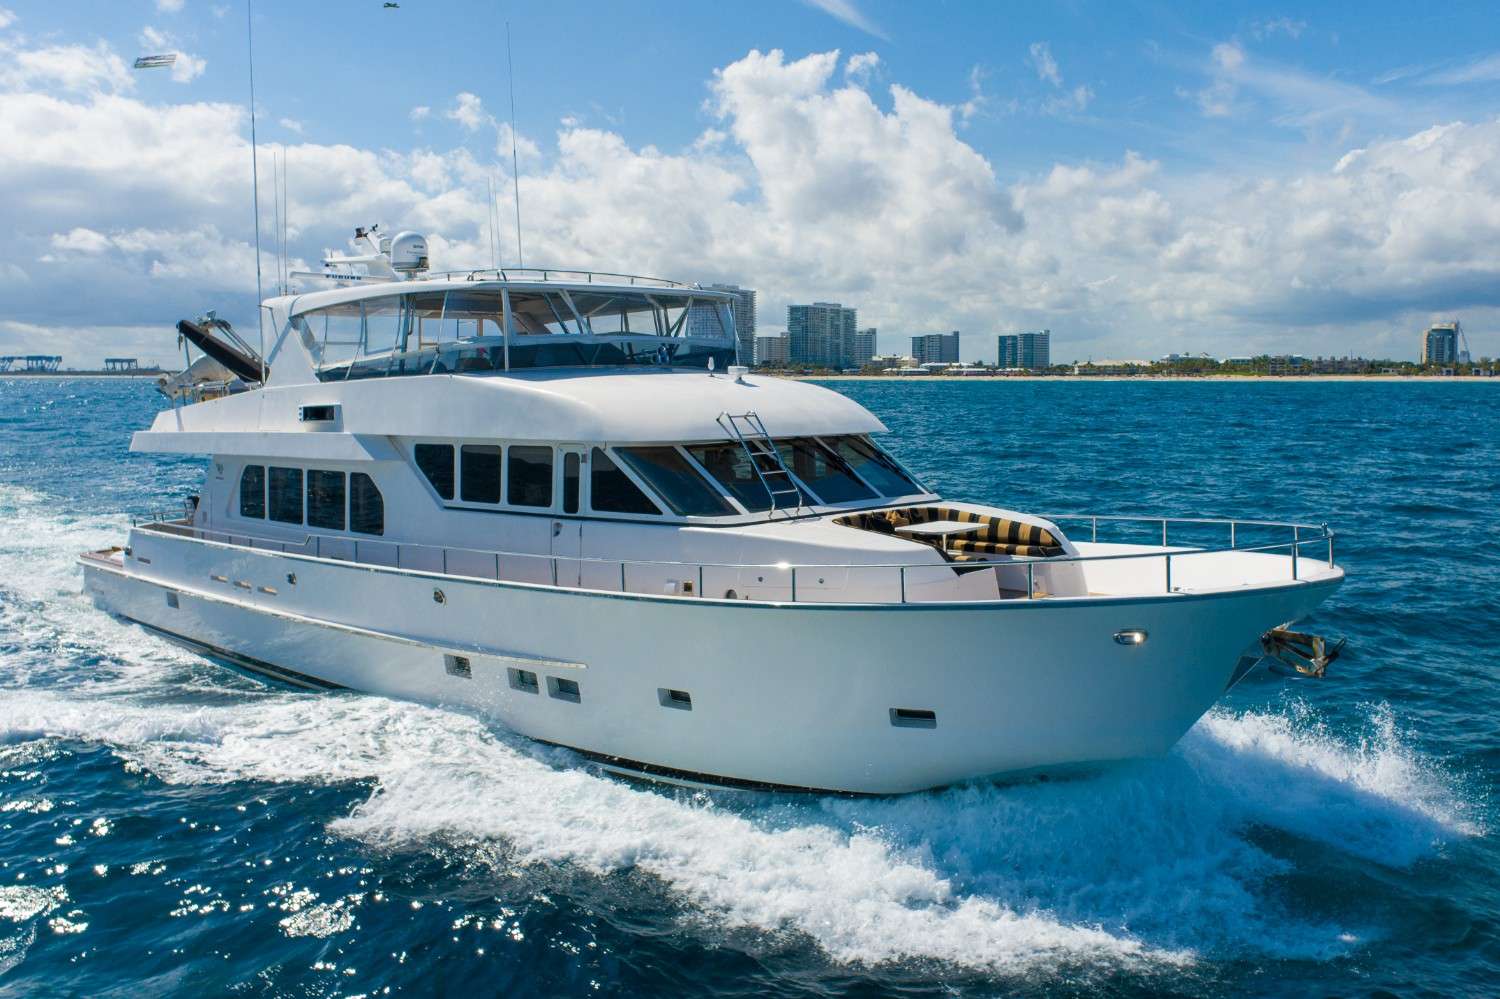 92ft Paragon motor yacht SEAS TO SEE operates in Northeast US and the Bahamas